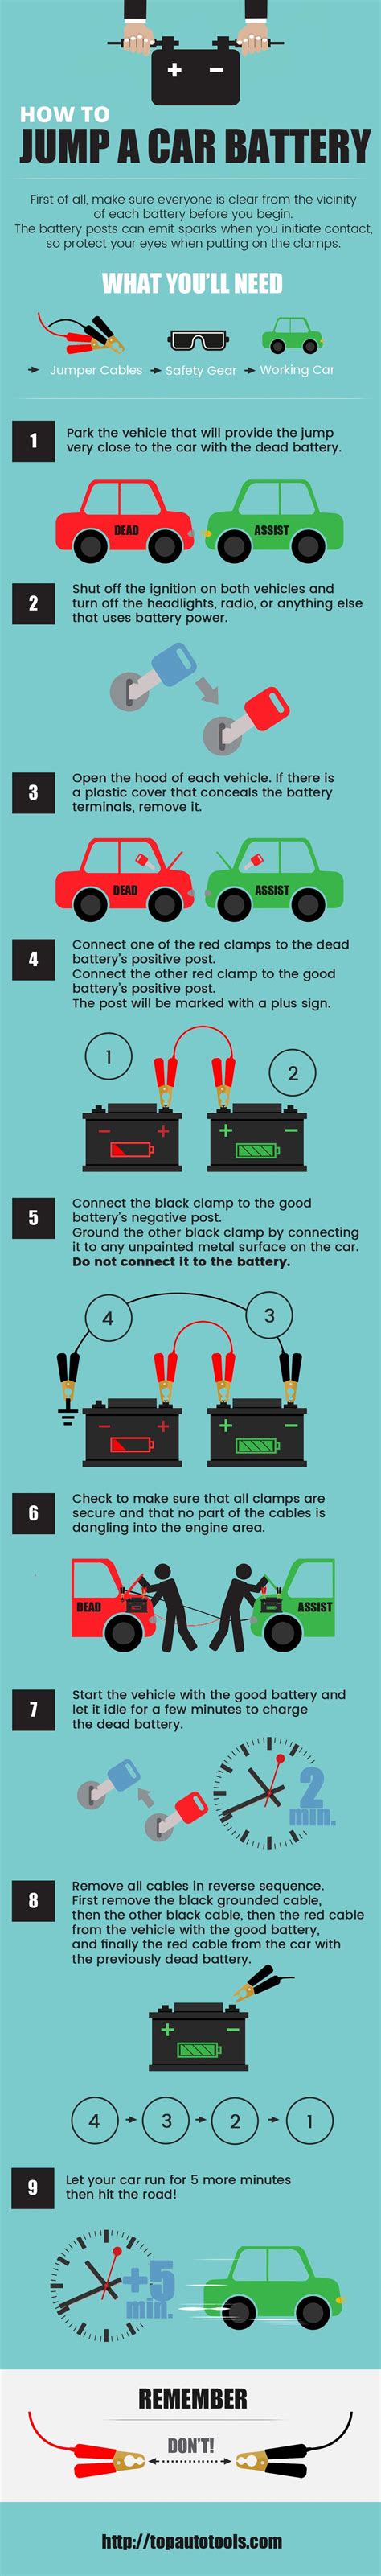 How to use jumper cables to jump start a car from another vehicle: Jump Starting a Car #Infographic ~ Visualistan